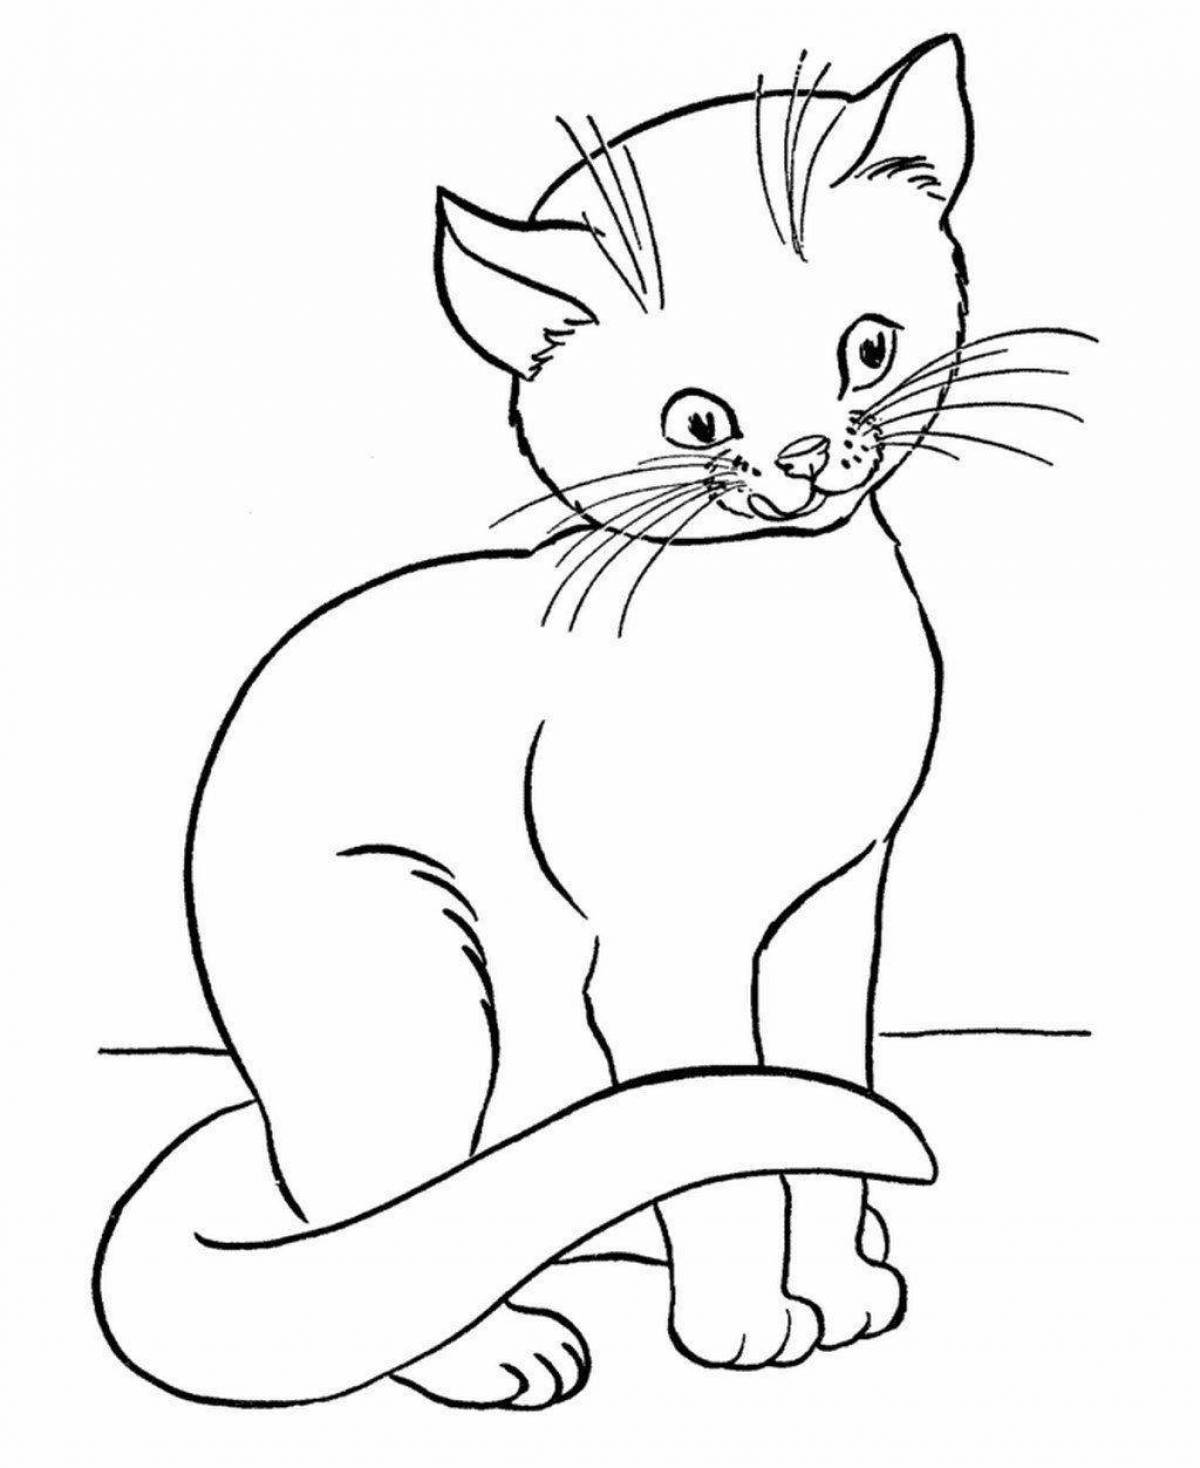 Coloring cat for kids